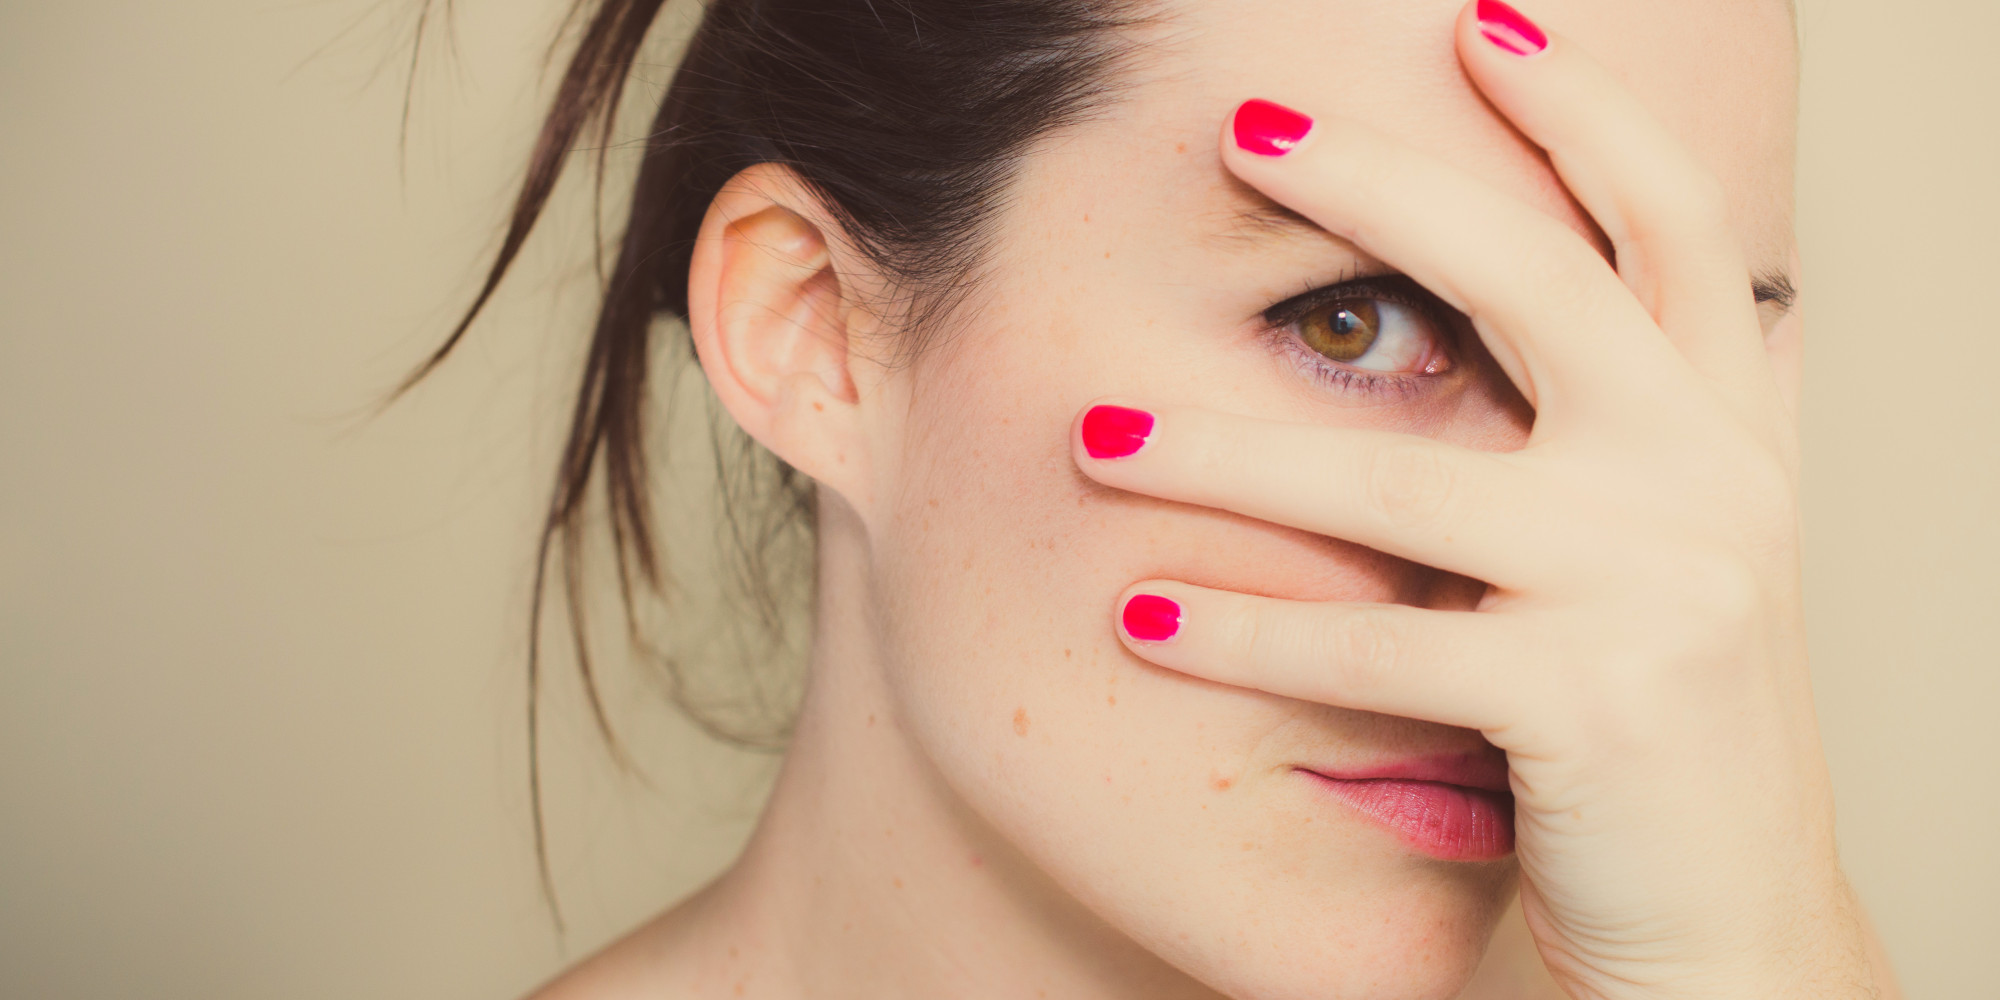 Misterious girl with red nails and hand on face.